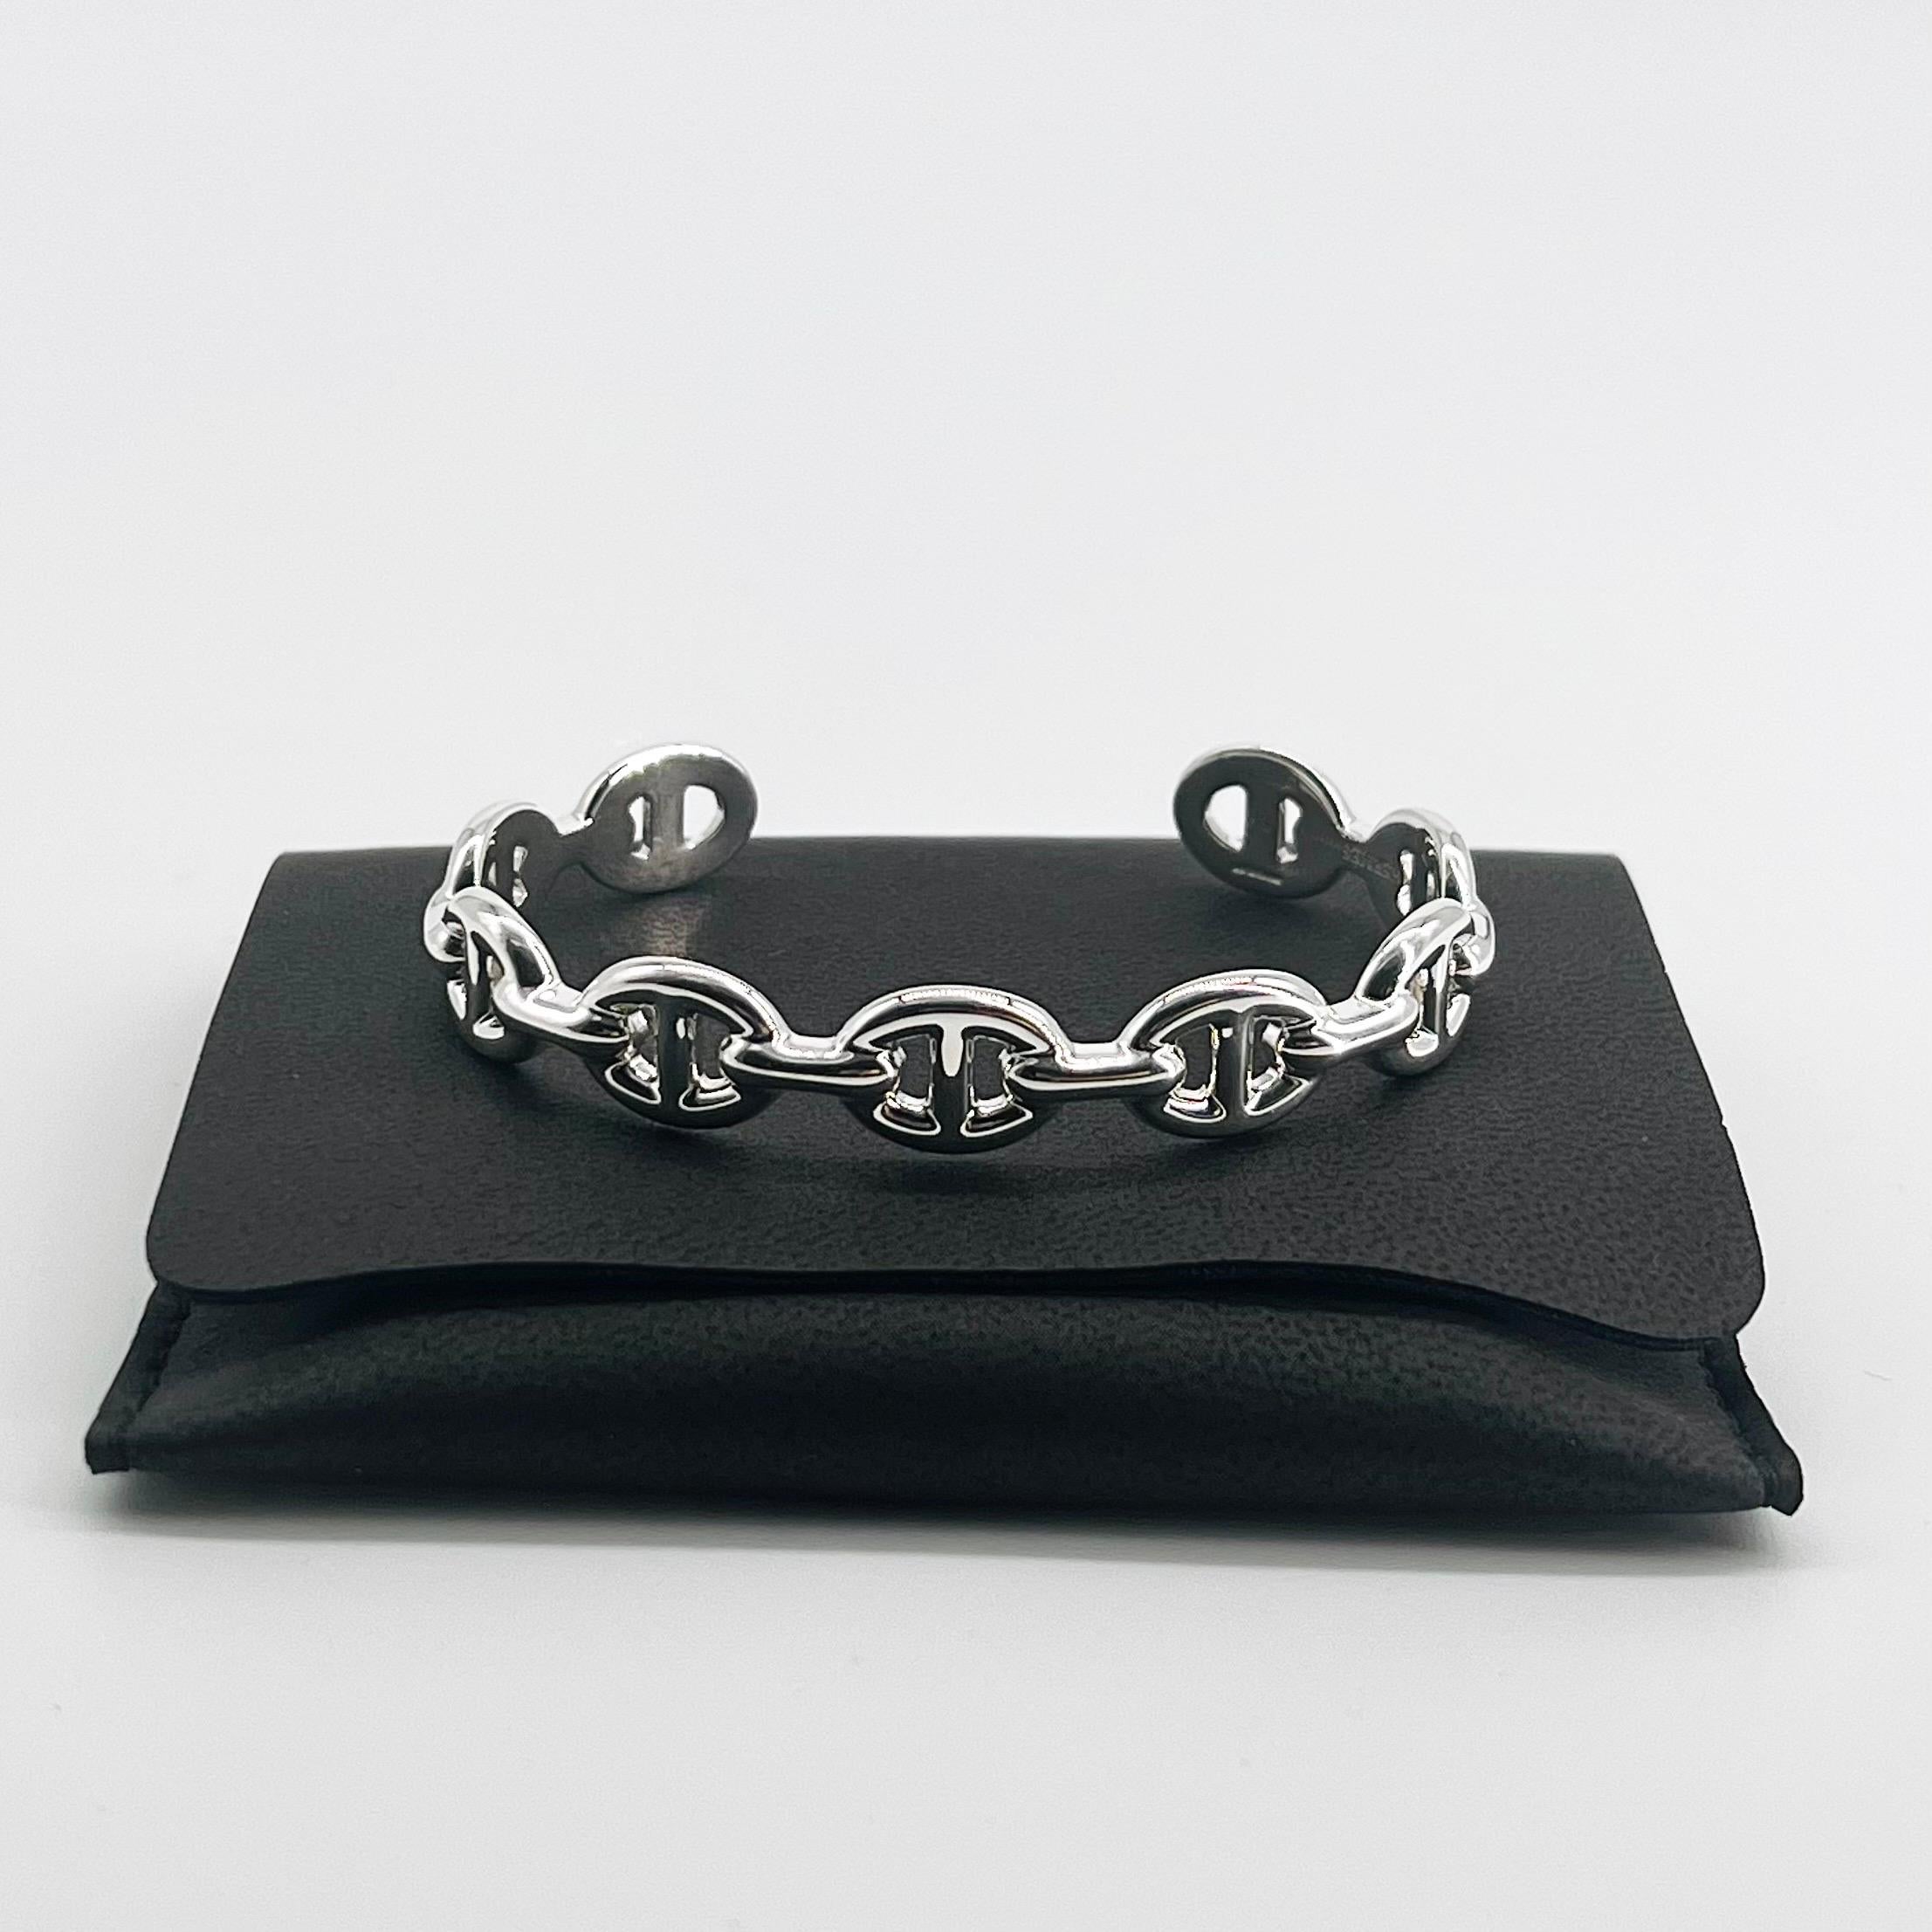 This Chaîne D'Ancre Enchaînée Bracelet comes in Sterling Silver. It features the classic Hermès turn clasp which has been turned into a beautiful piece of elegant jewellery. Circumference: 17 cm

Condition: Brand New. Comes with the original box and